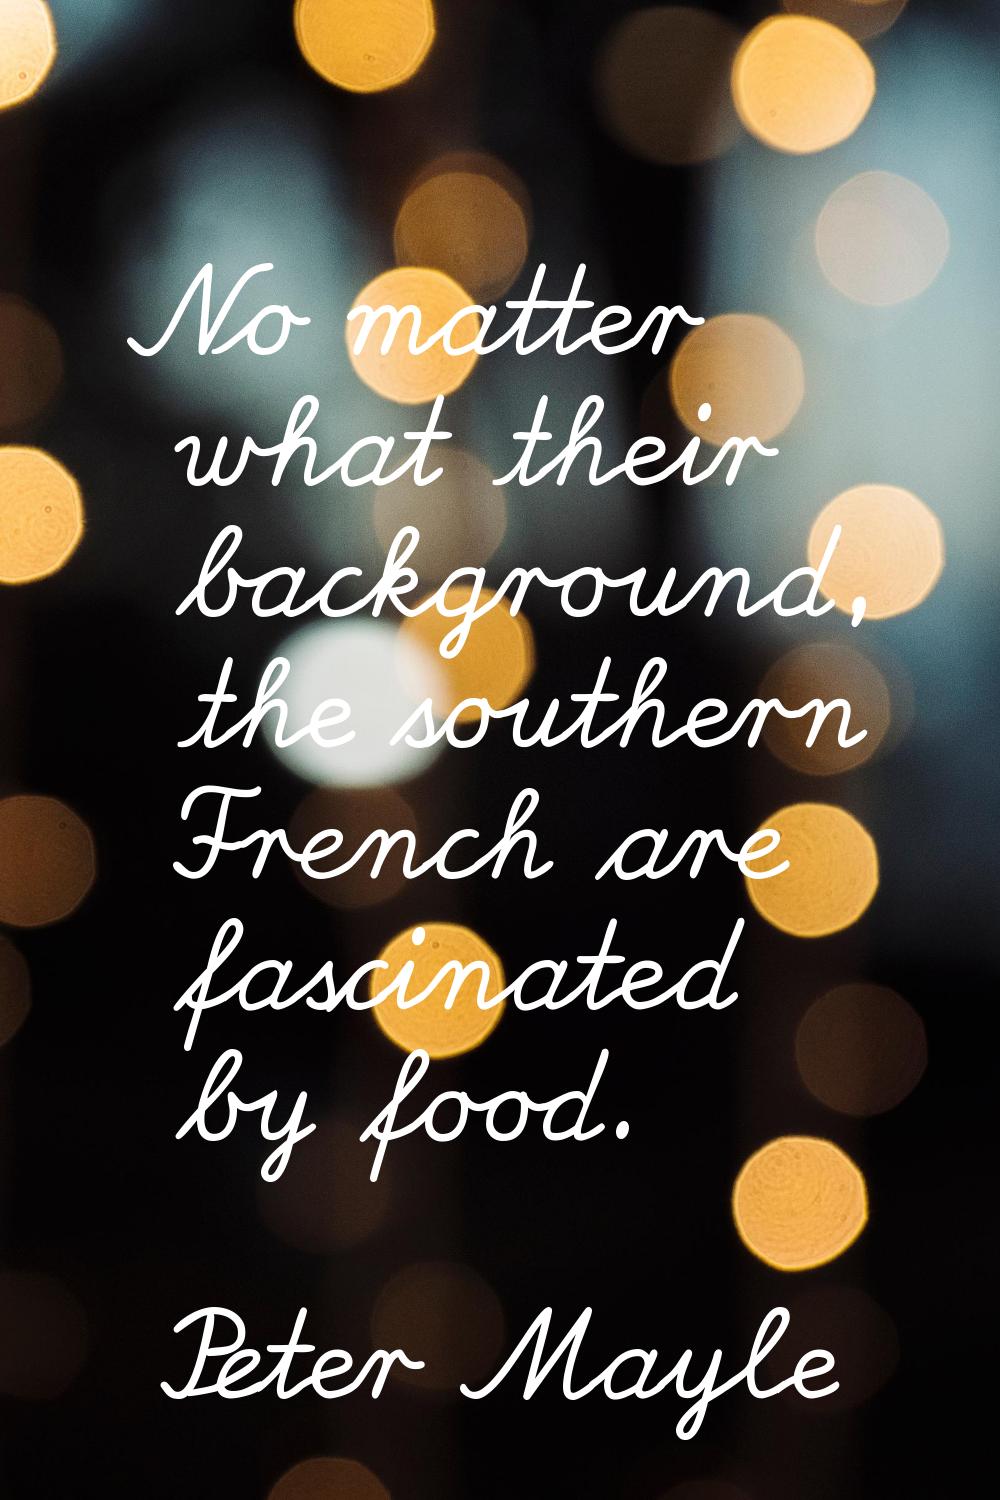 No matter what their background, the southern French are fascinated by food.